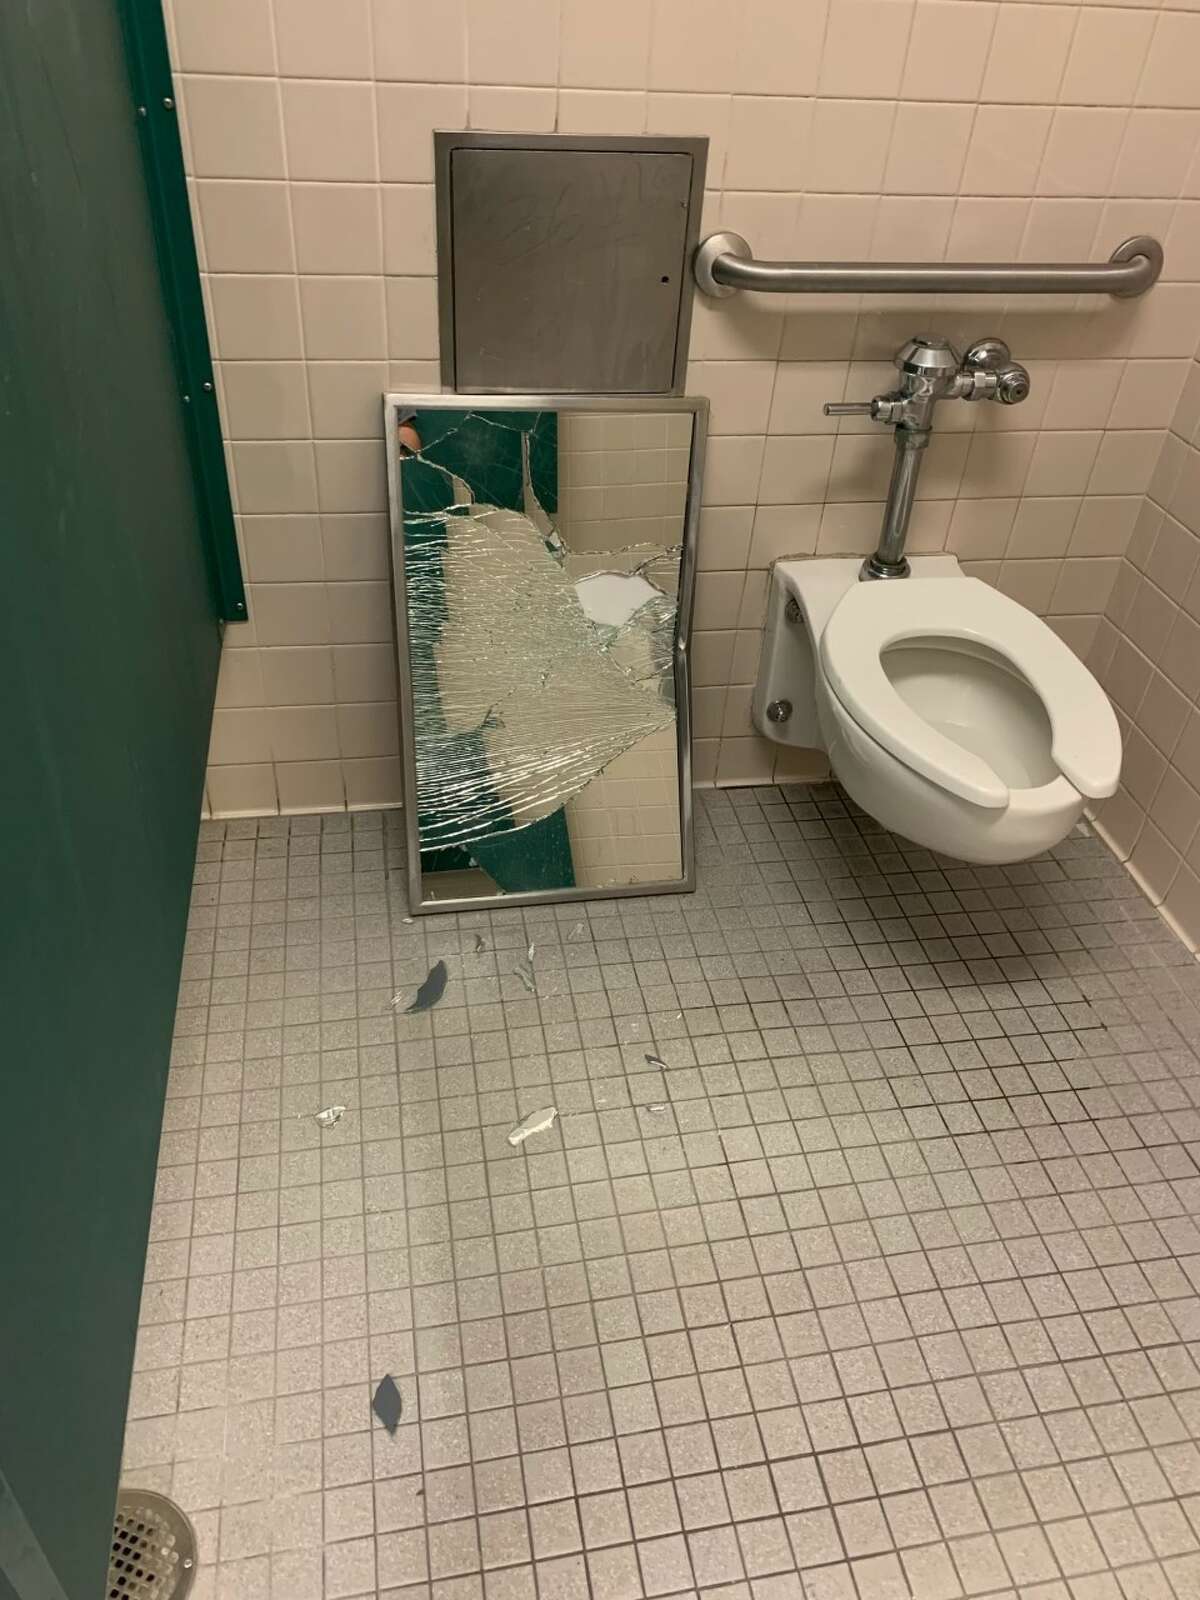 Pictures from NEISD show just some of the vandalism discovered on their campuses. 